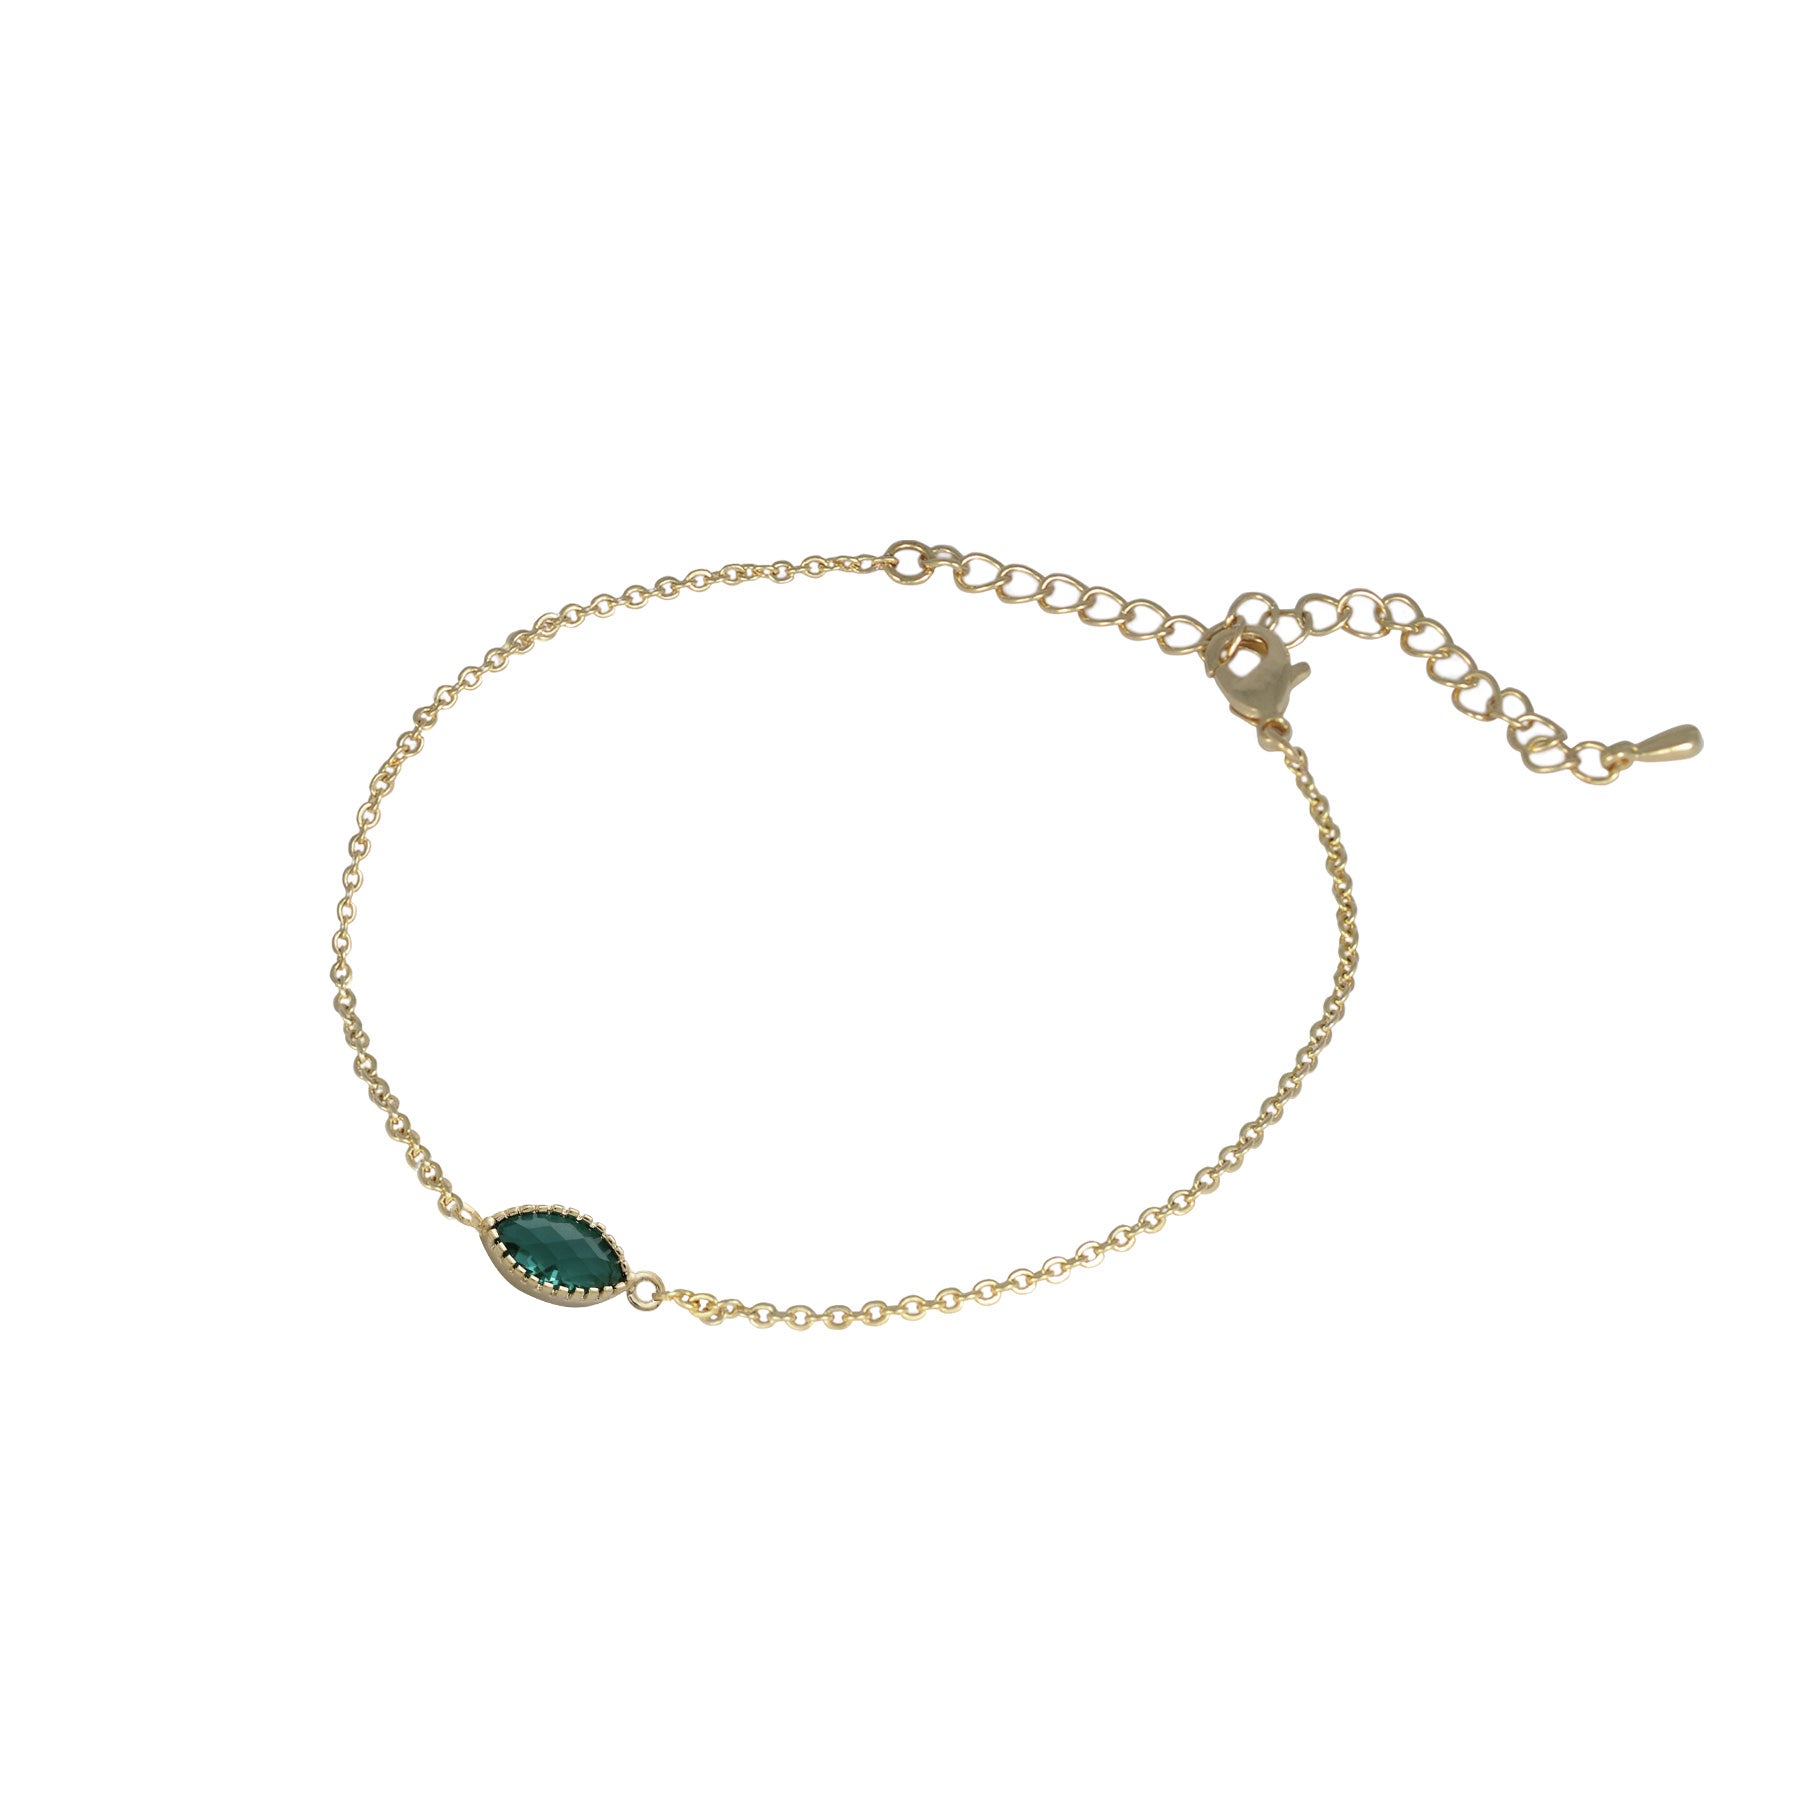 Gold and green marquise bracelet